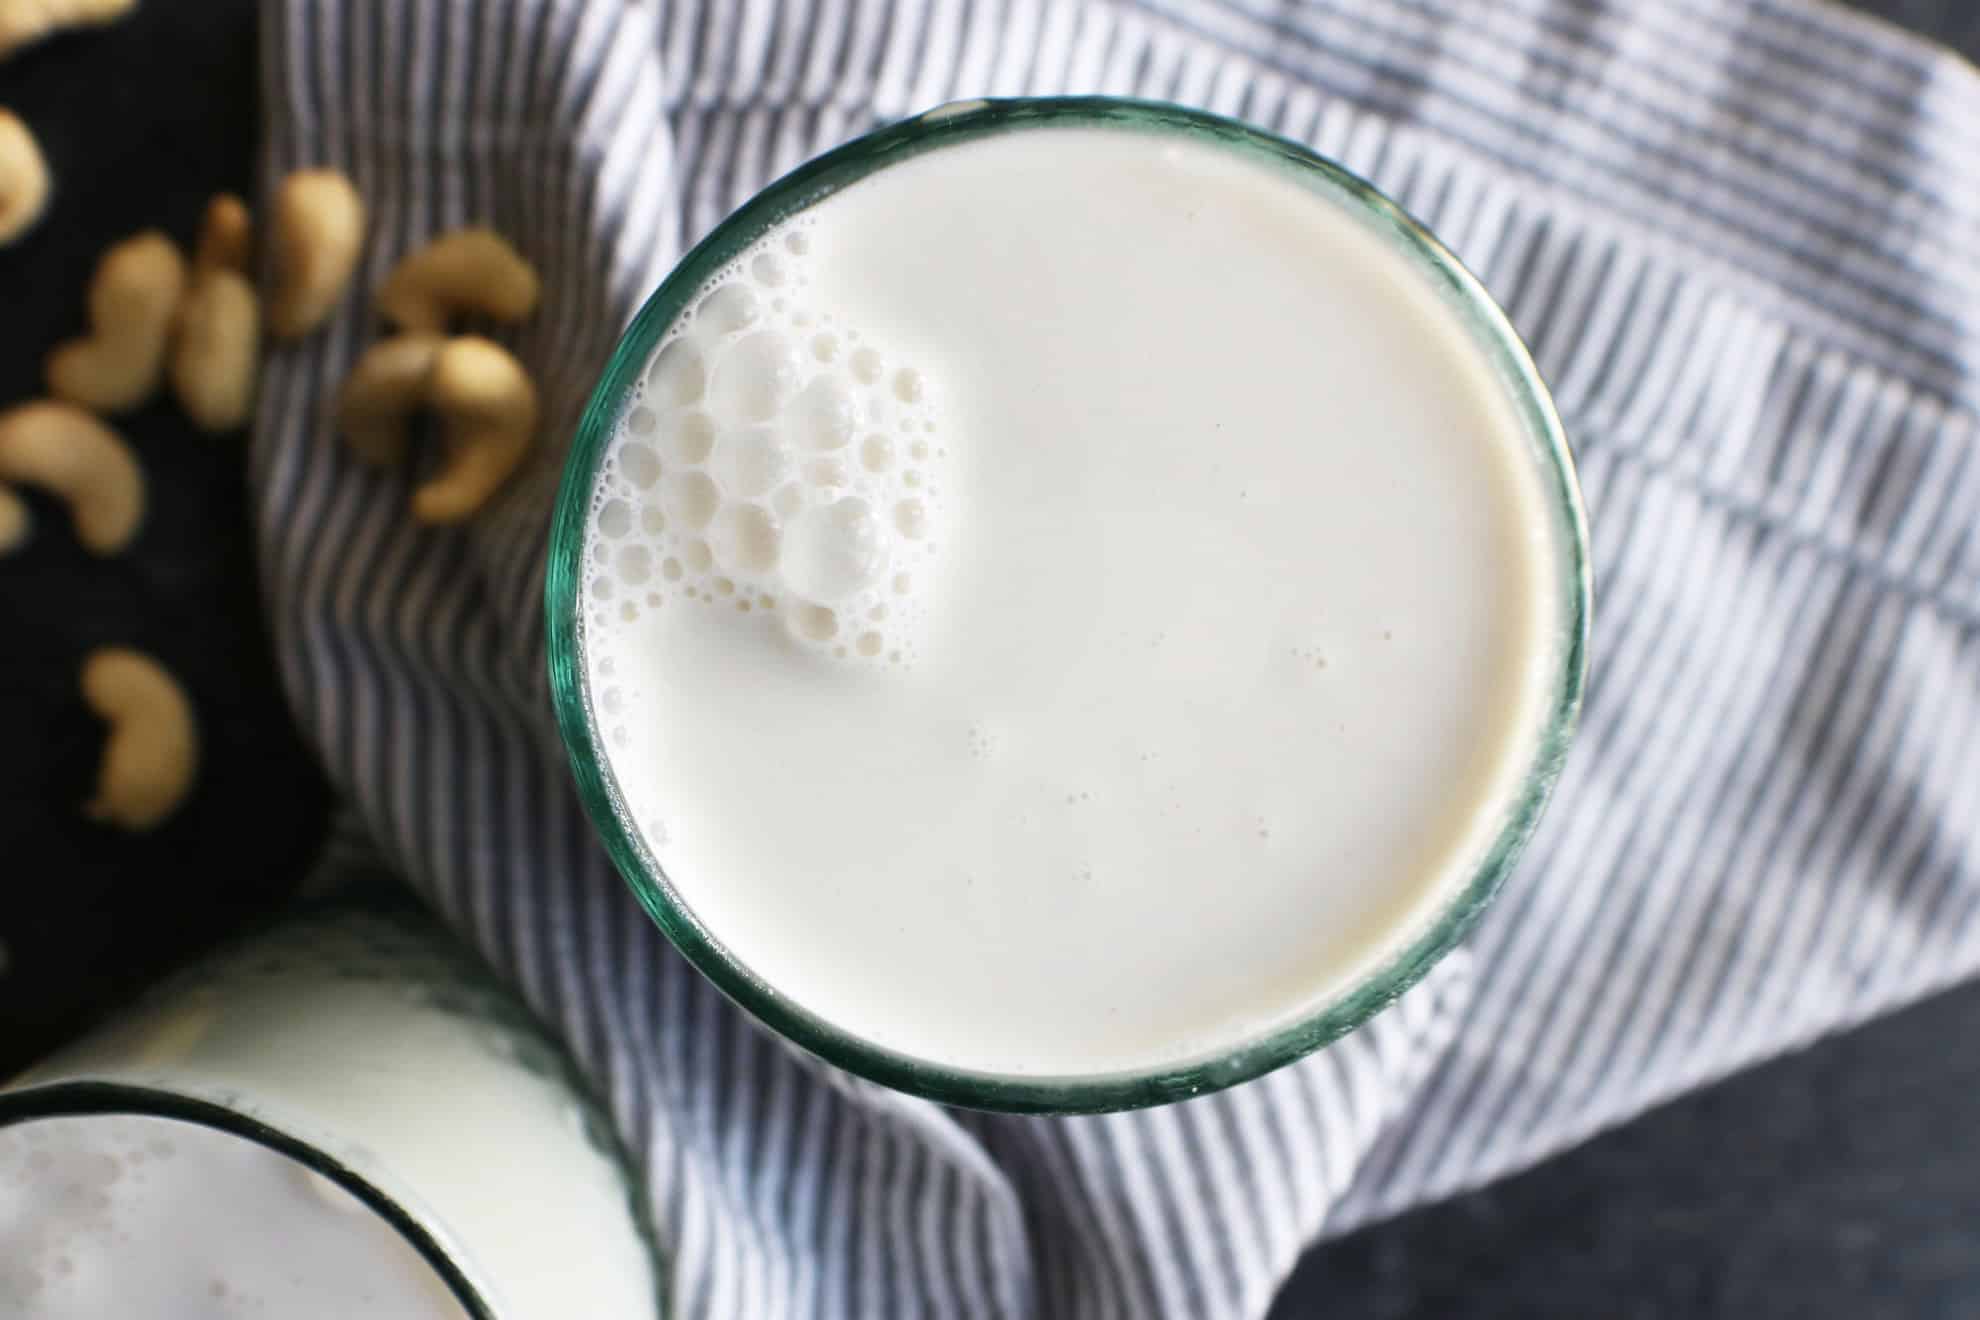 This is an overhead image of a glass filled with milk. The glass sits on a grey pinstripe tea towel on a dark grey surface. Cashews are scattered around the glass. 